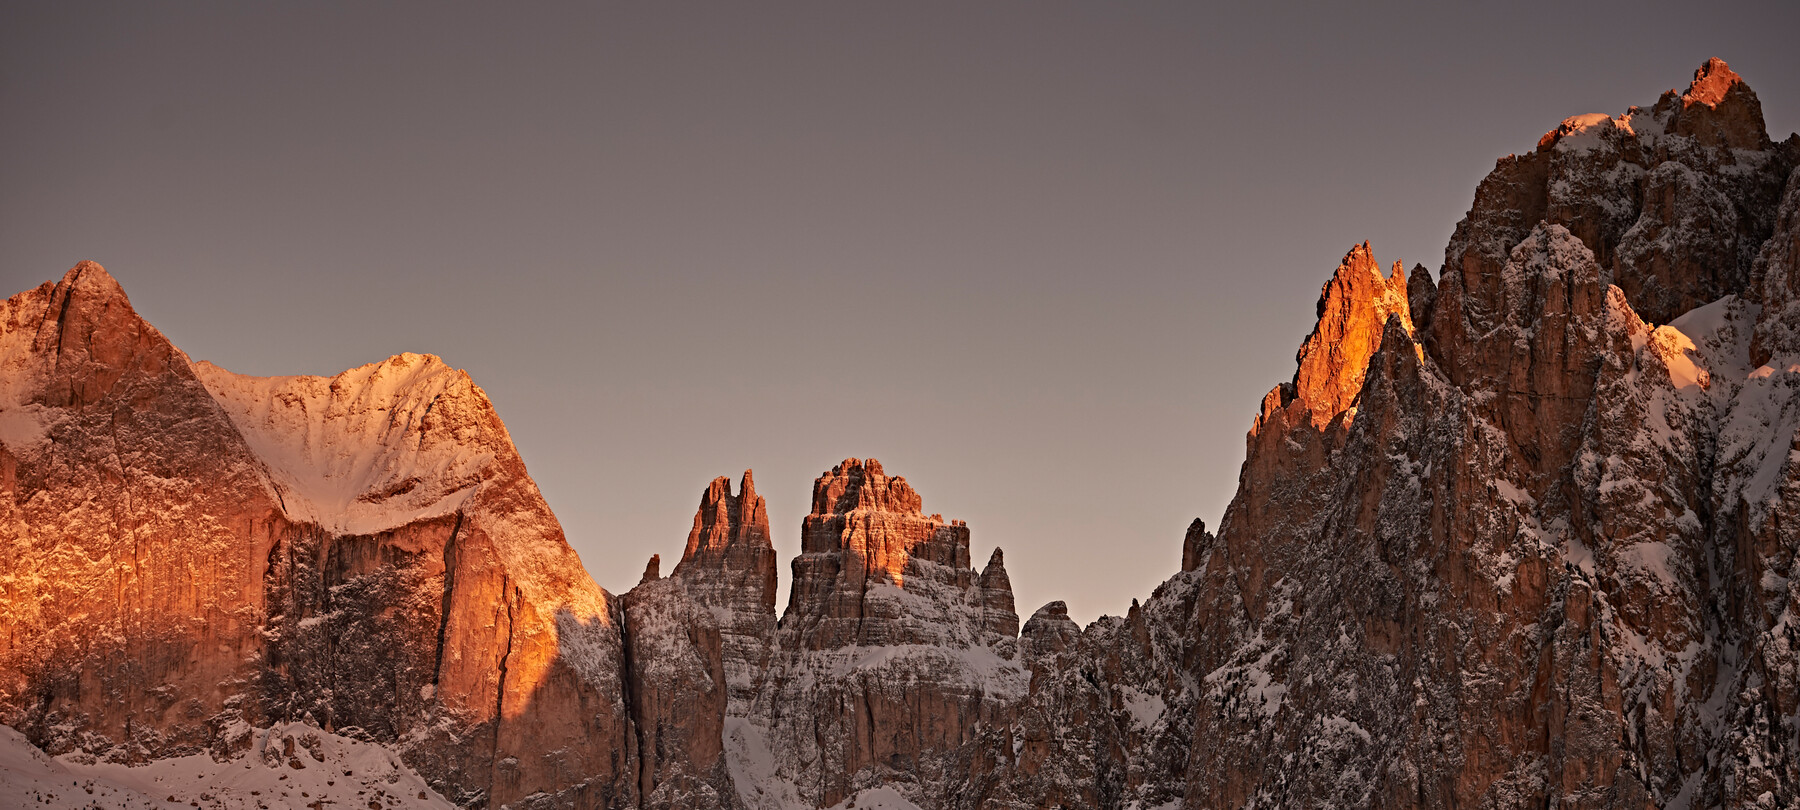 How were the Dolomites formed?